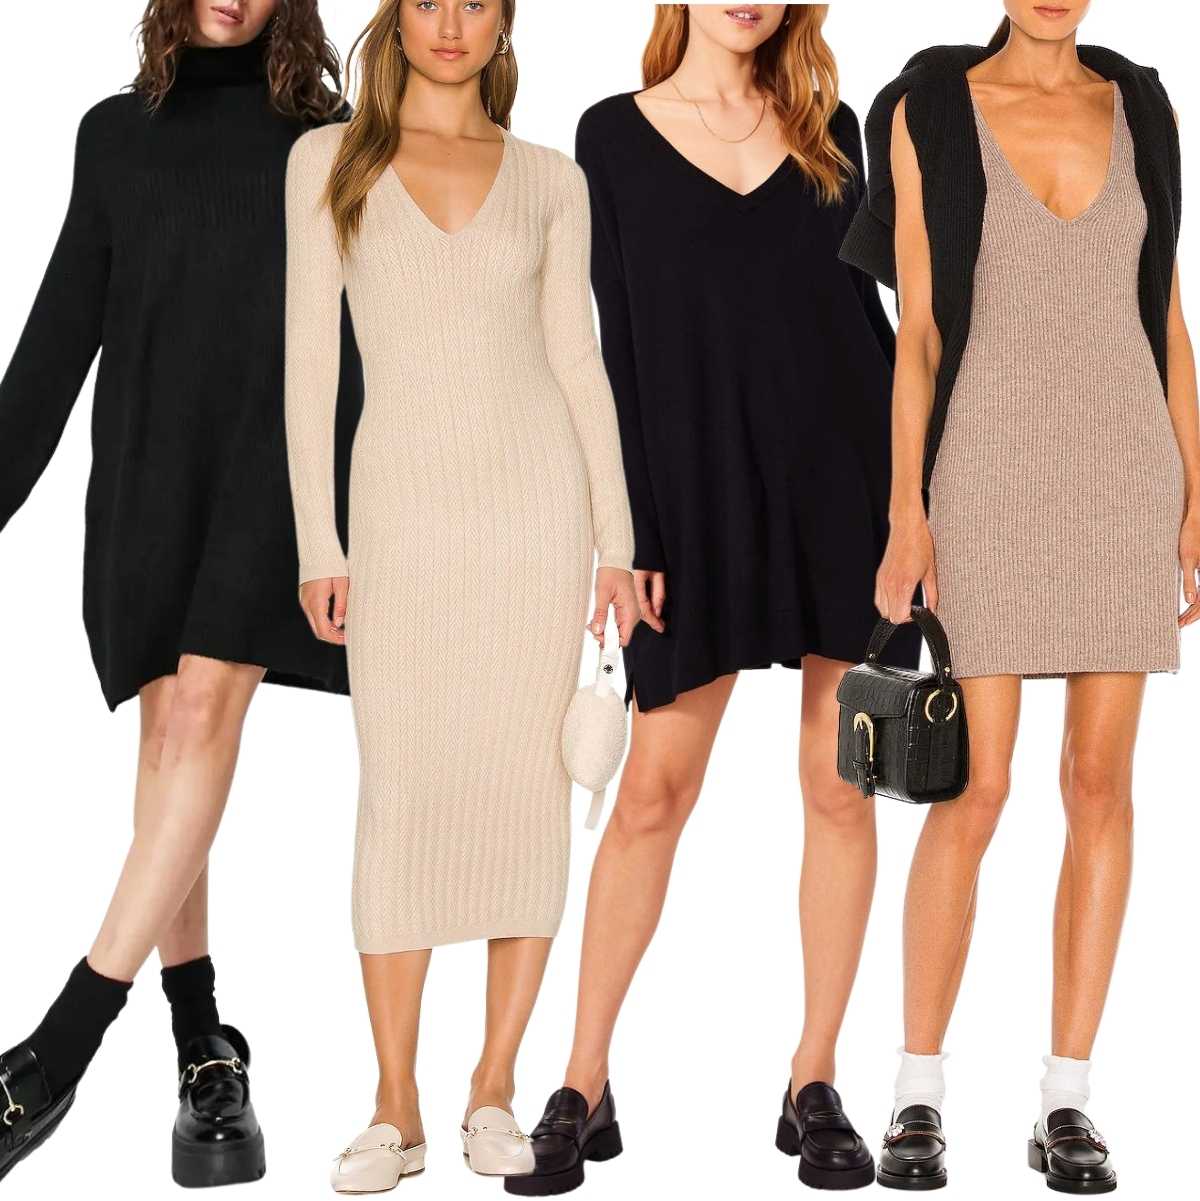 Collage of 5 women wearing loafers with sweater dresses.